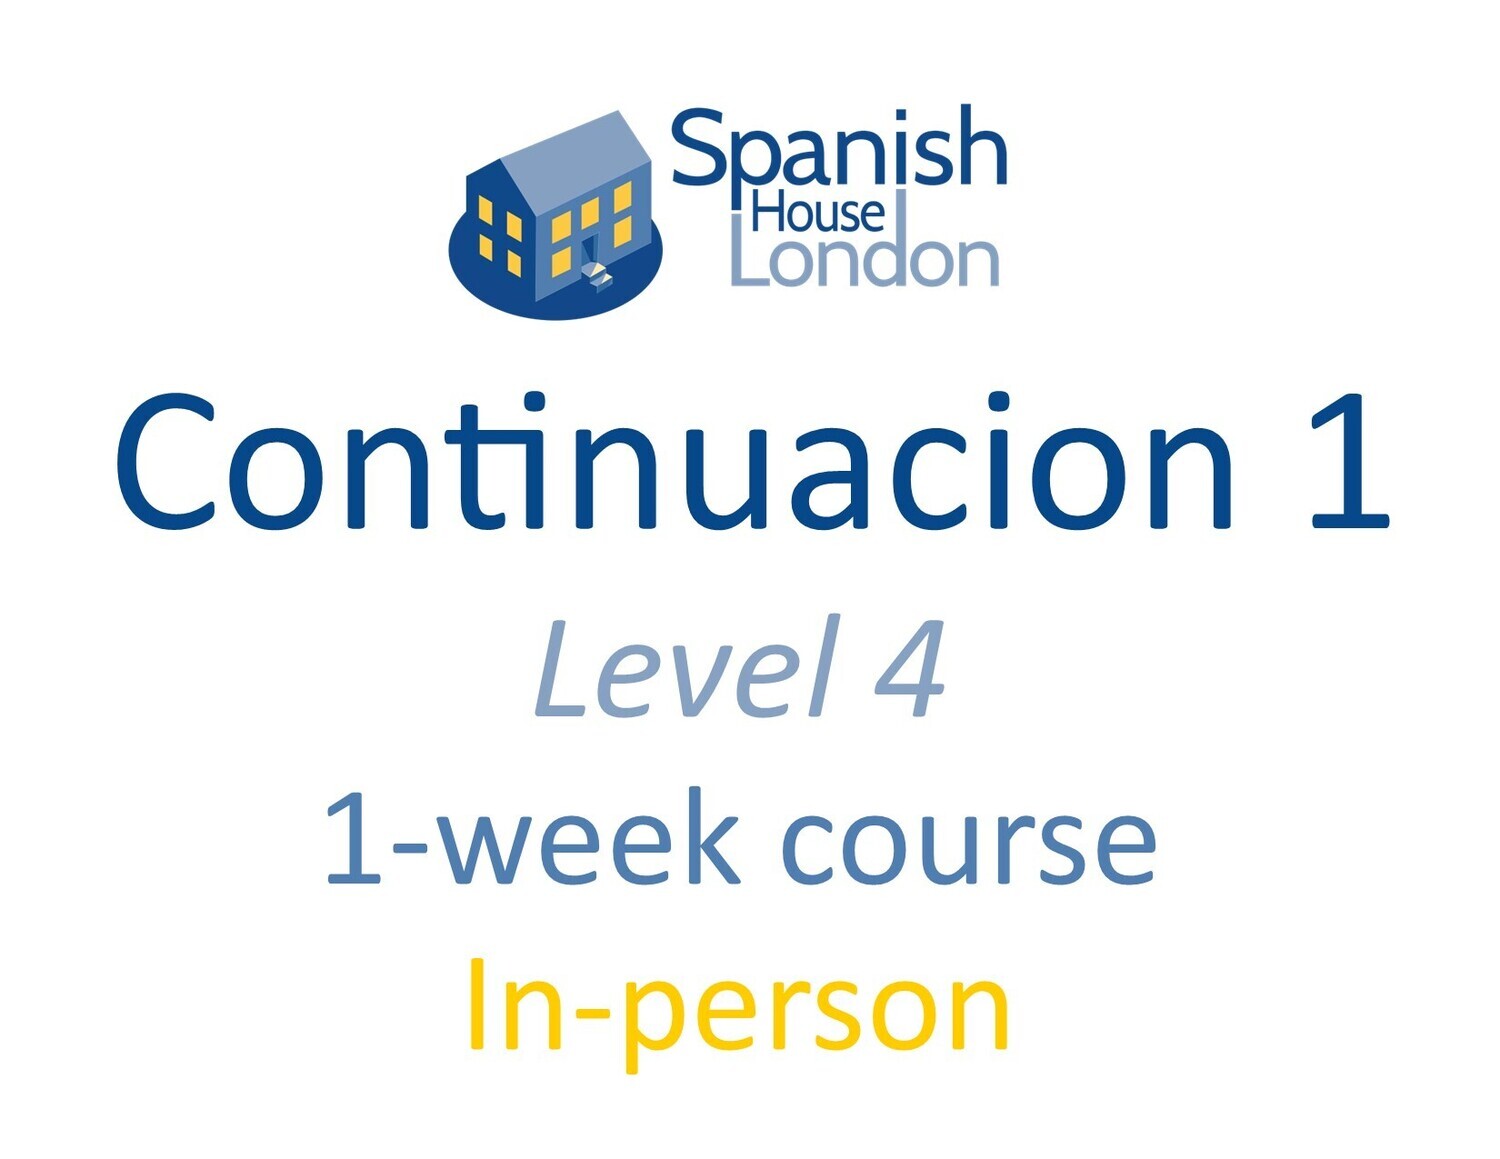 One-Week Intensive Continuacion 1 Course starting on 6th November at 10.30am in Clapham North